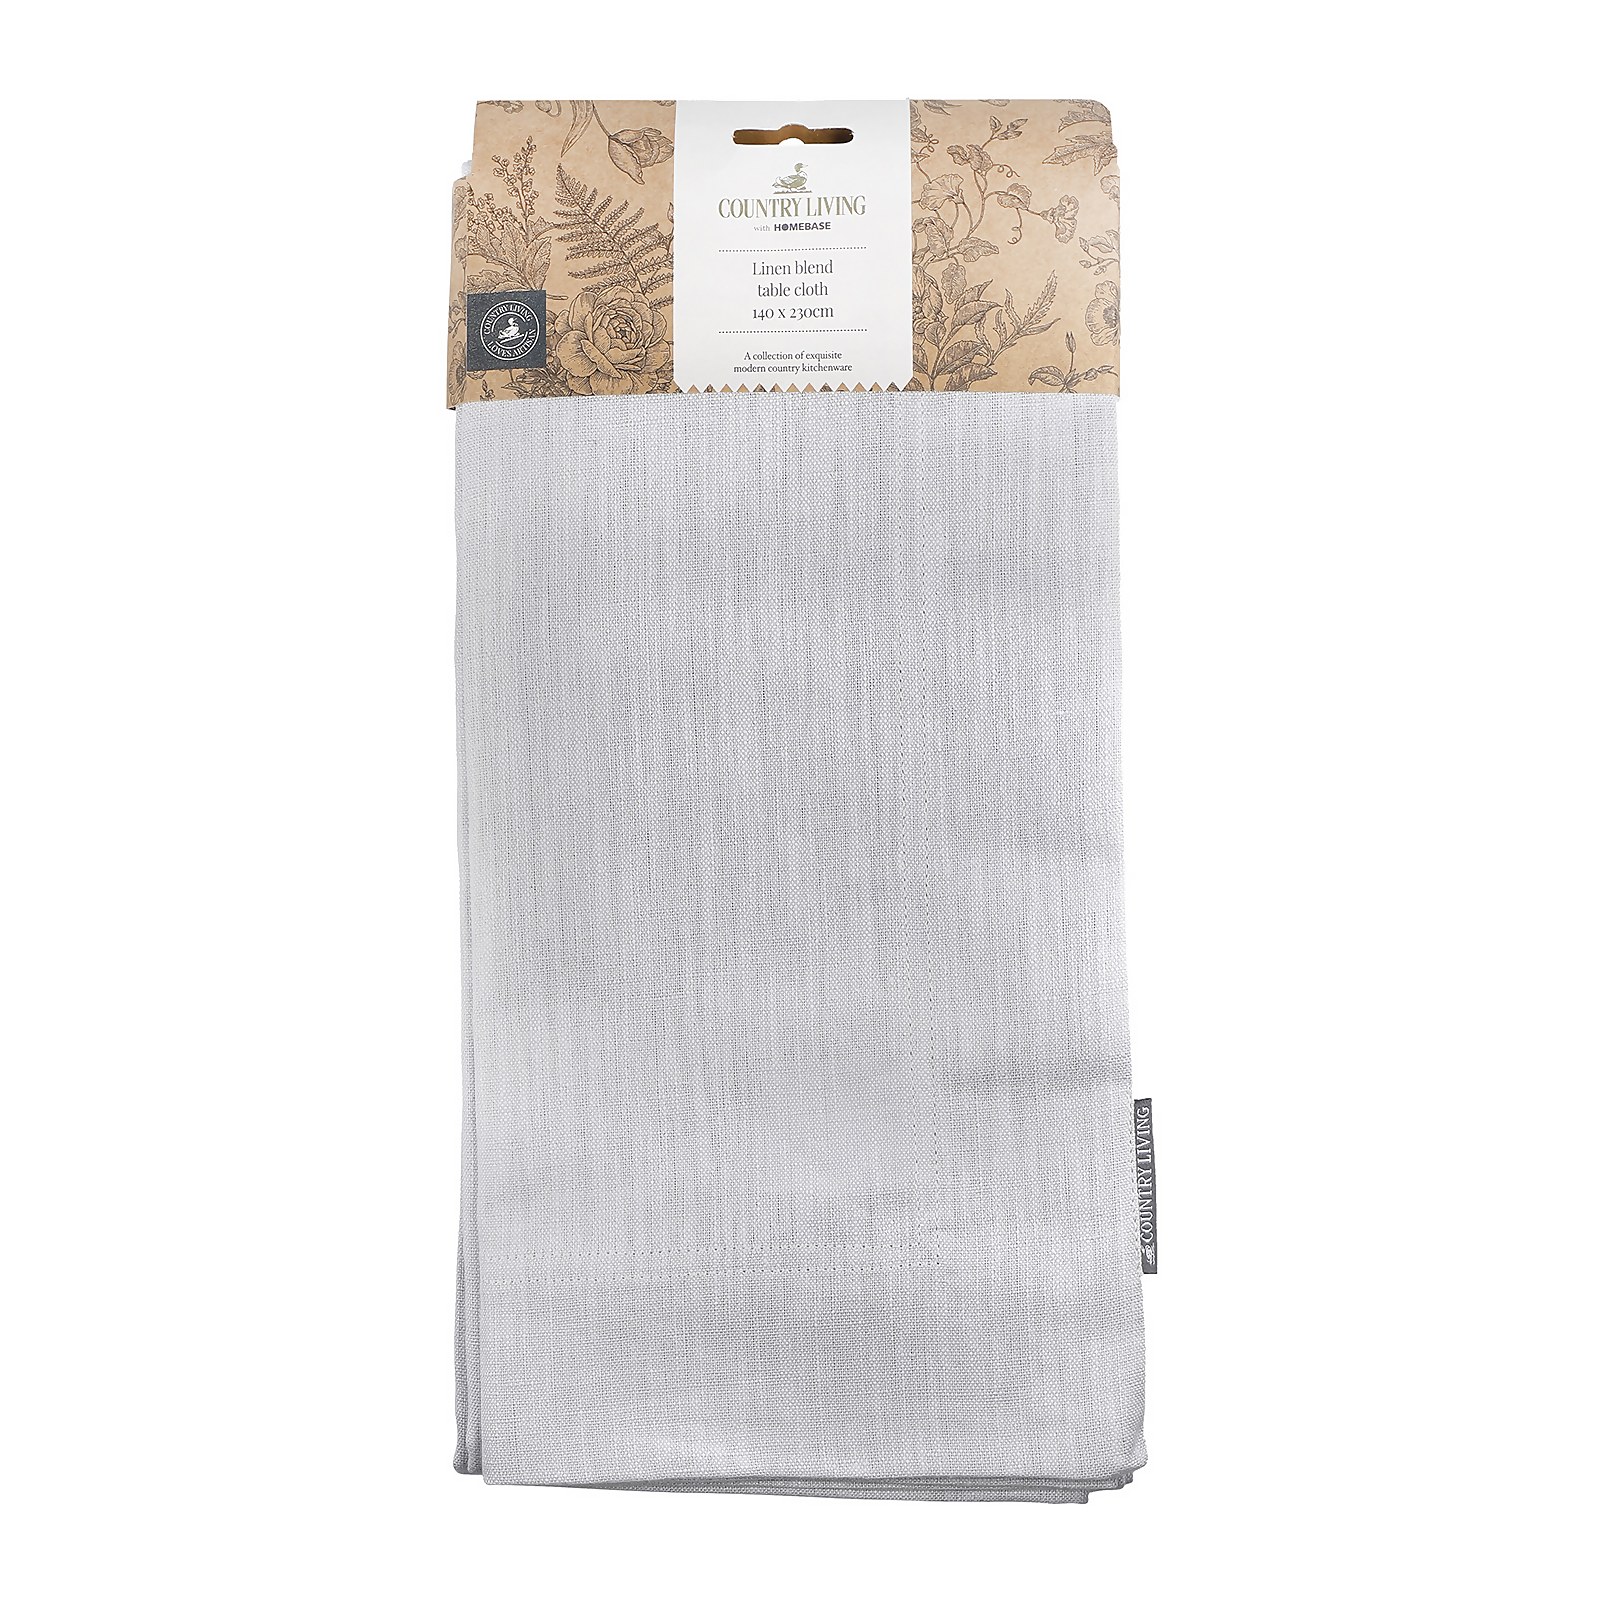 Photo of Country Living Linen Blend Tablecloth - Grey 140x230cm